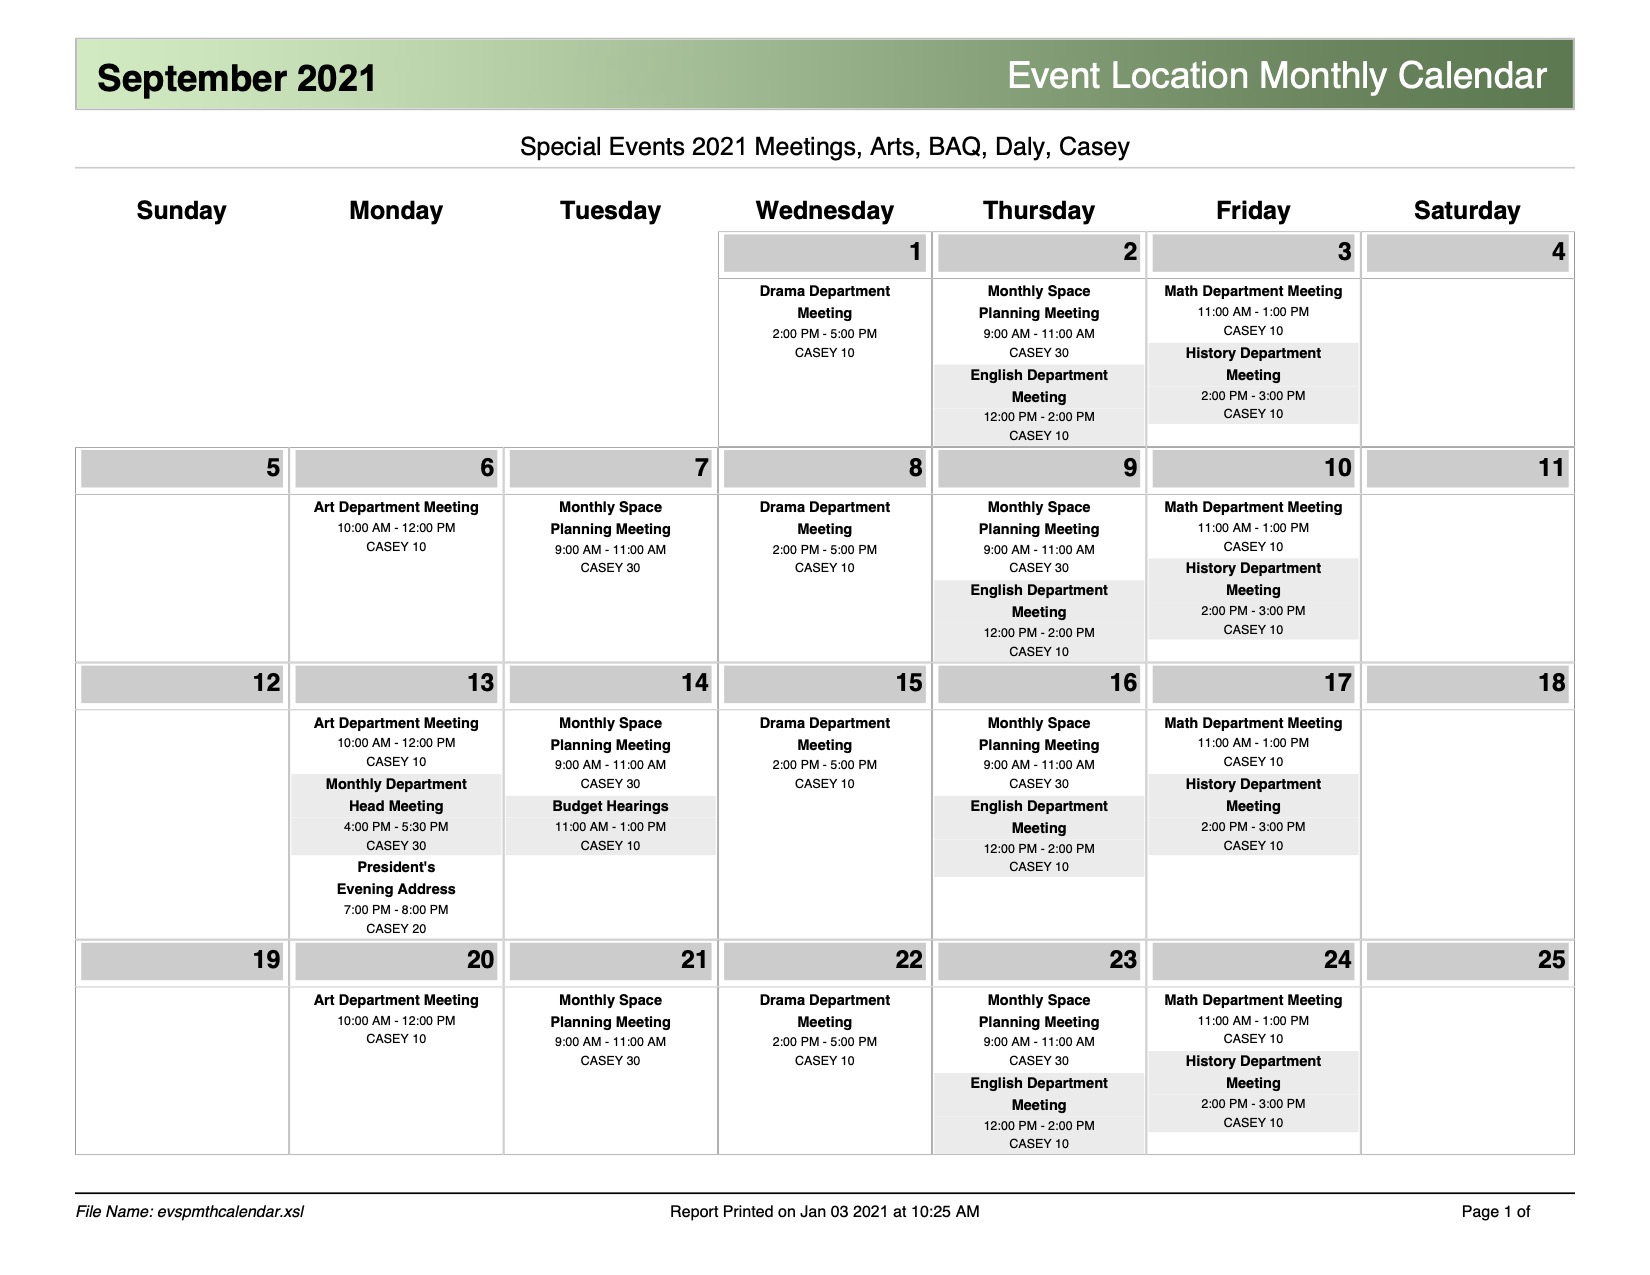 Event location monthly calendar example